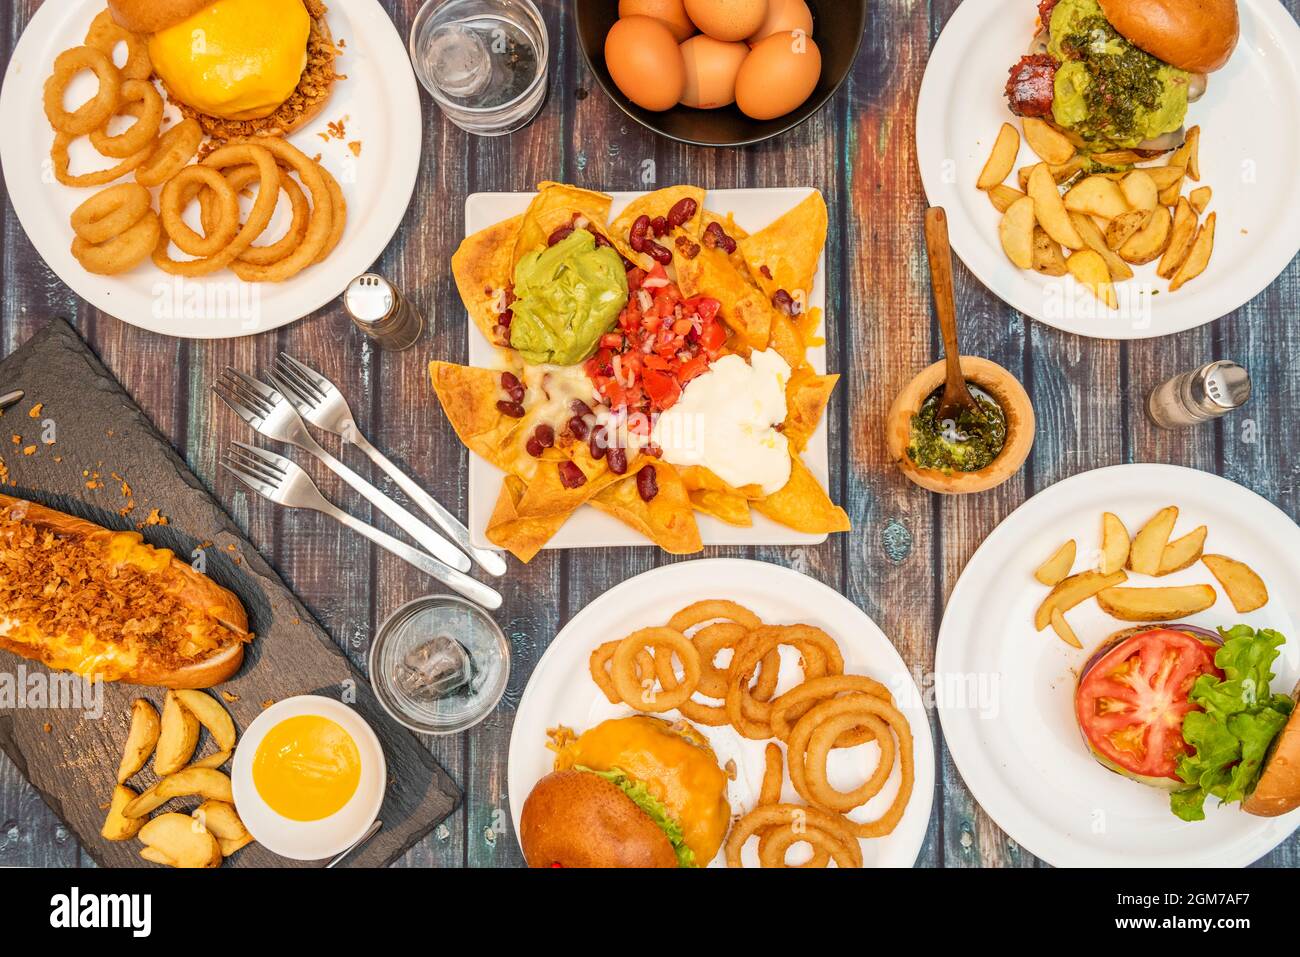 Unhealthy take away food set, hamburgers and hot dogs, battered onion rings, forks and glasses of water. Stock Photo